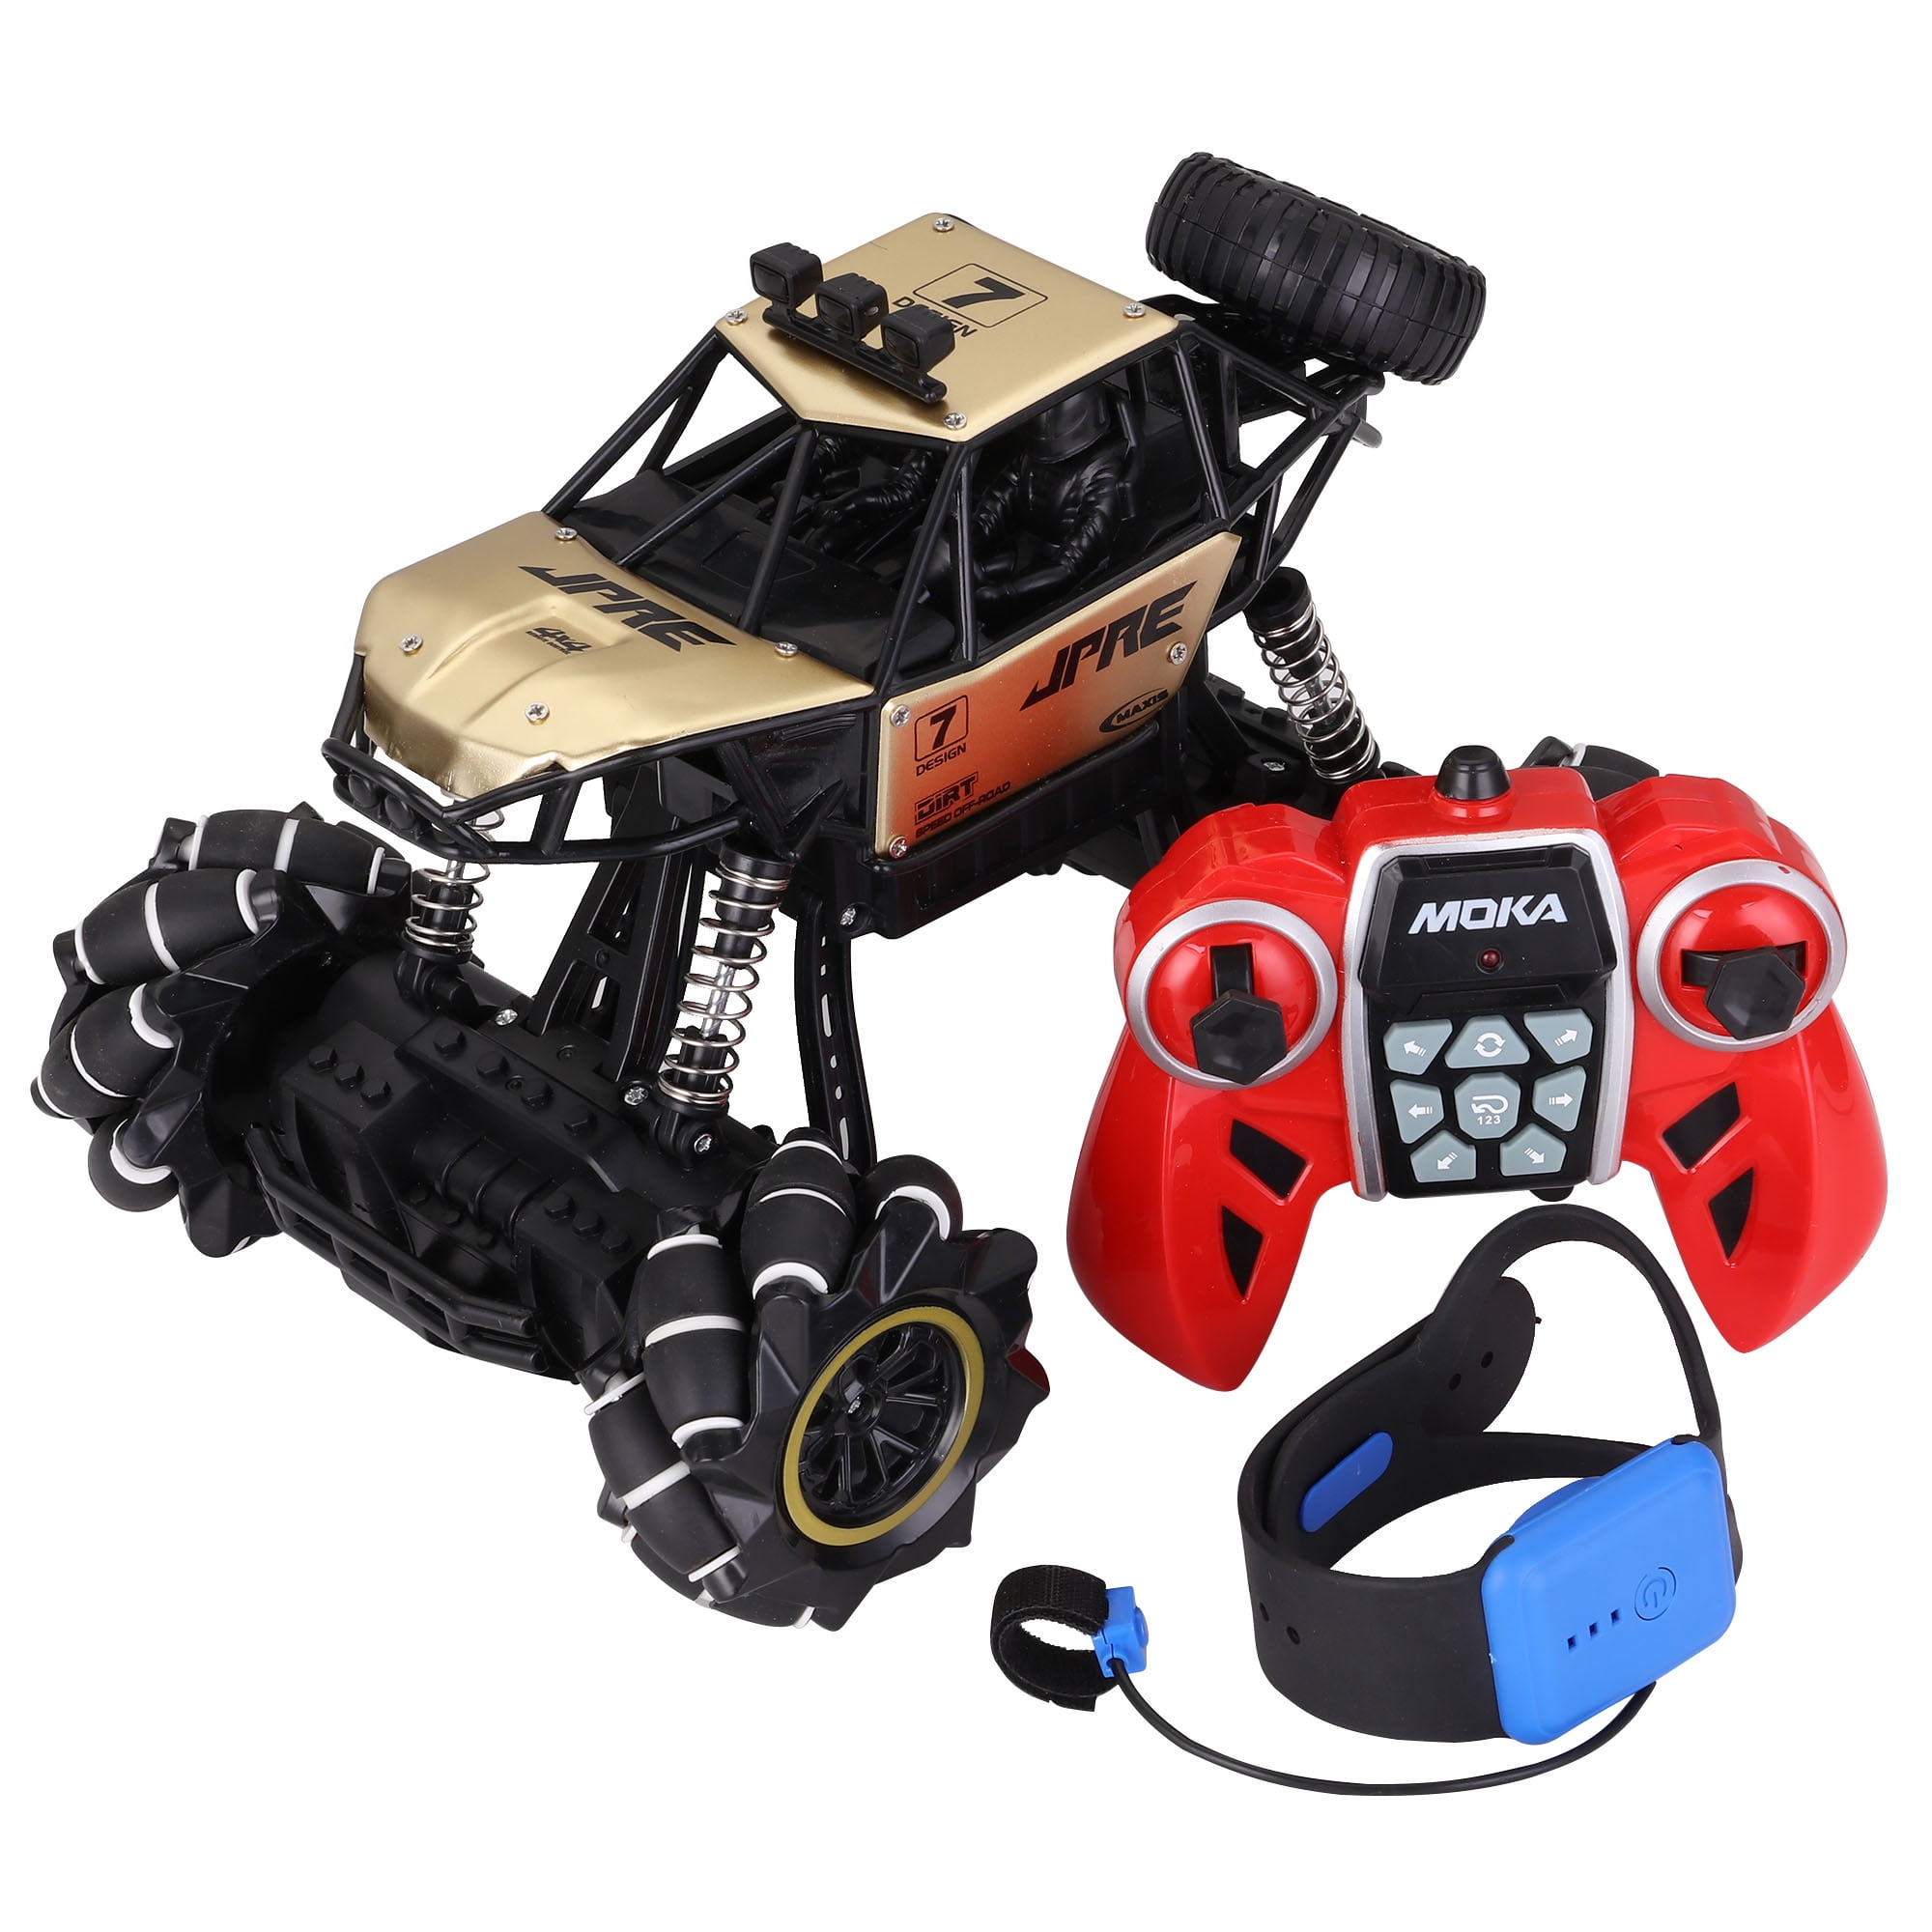 Car Remote Control Rc Monster Truck